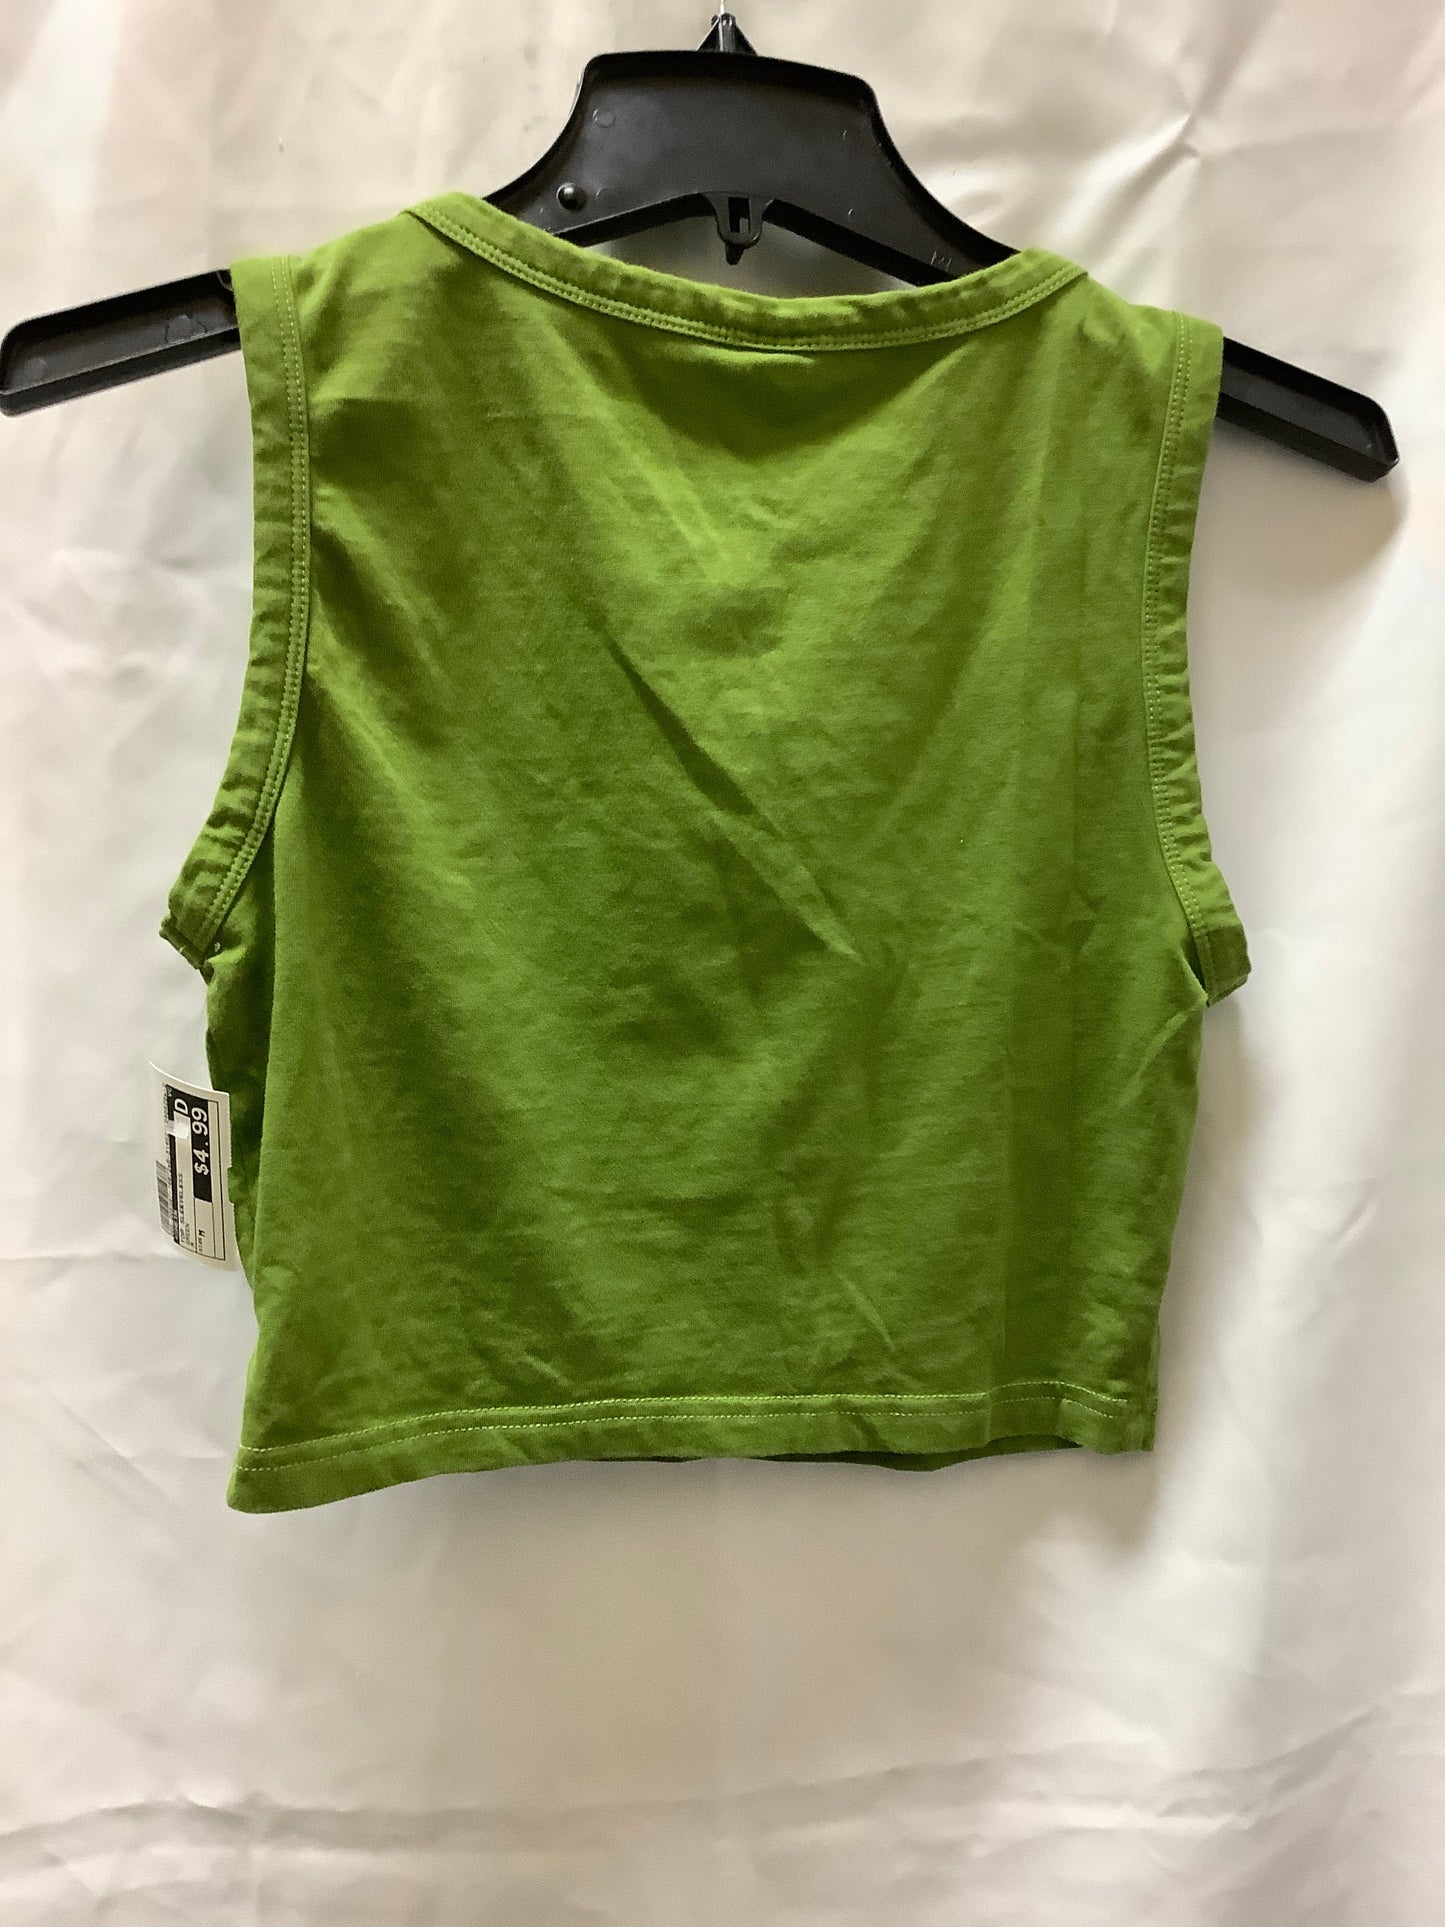 Top Sleeveless By Shein  Size: M